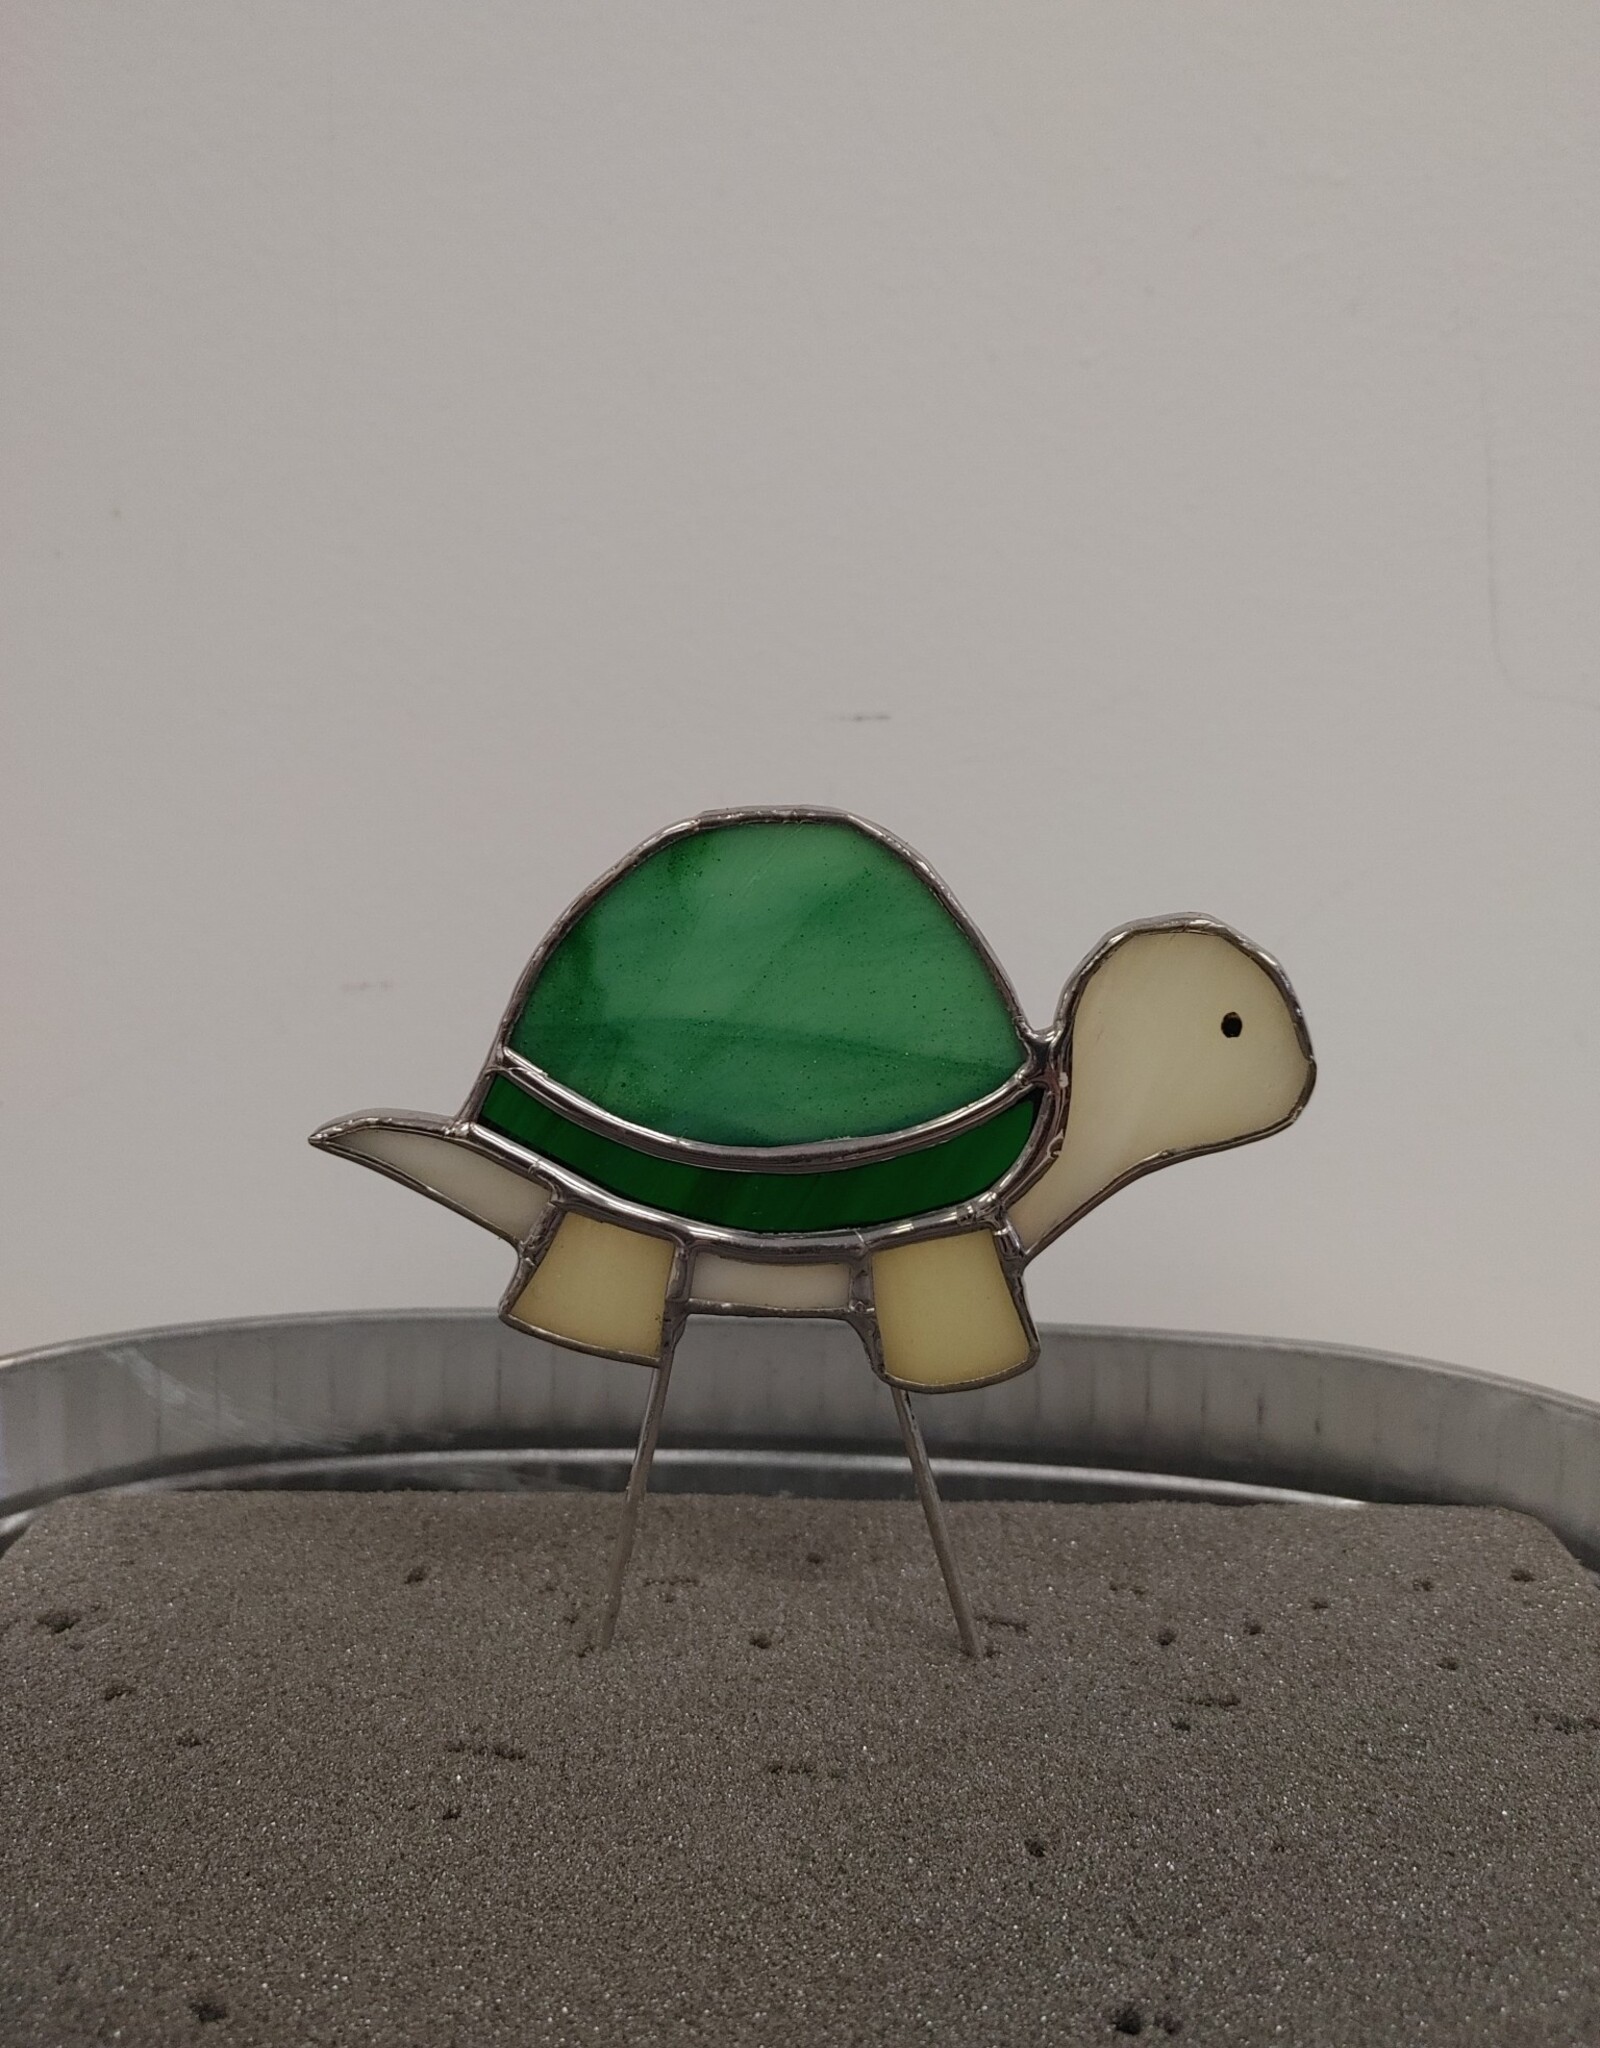 Stained Glass Turtle